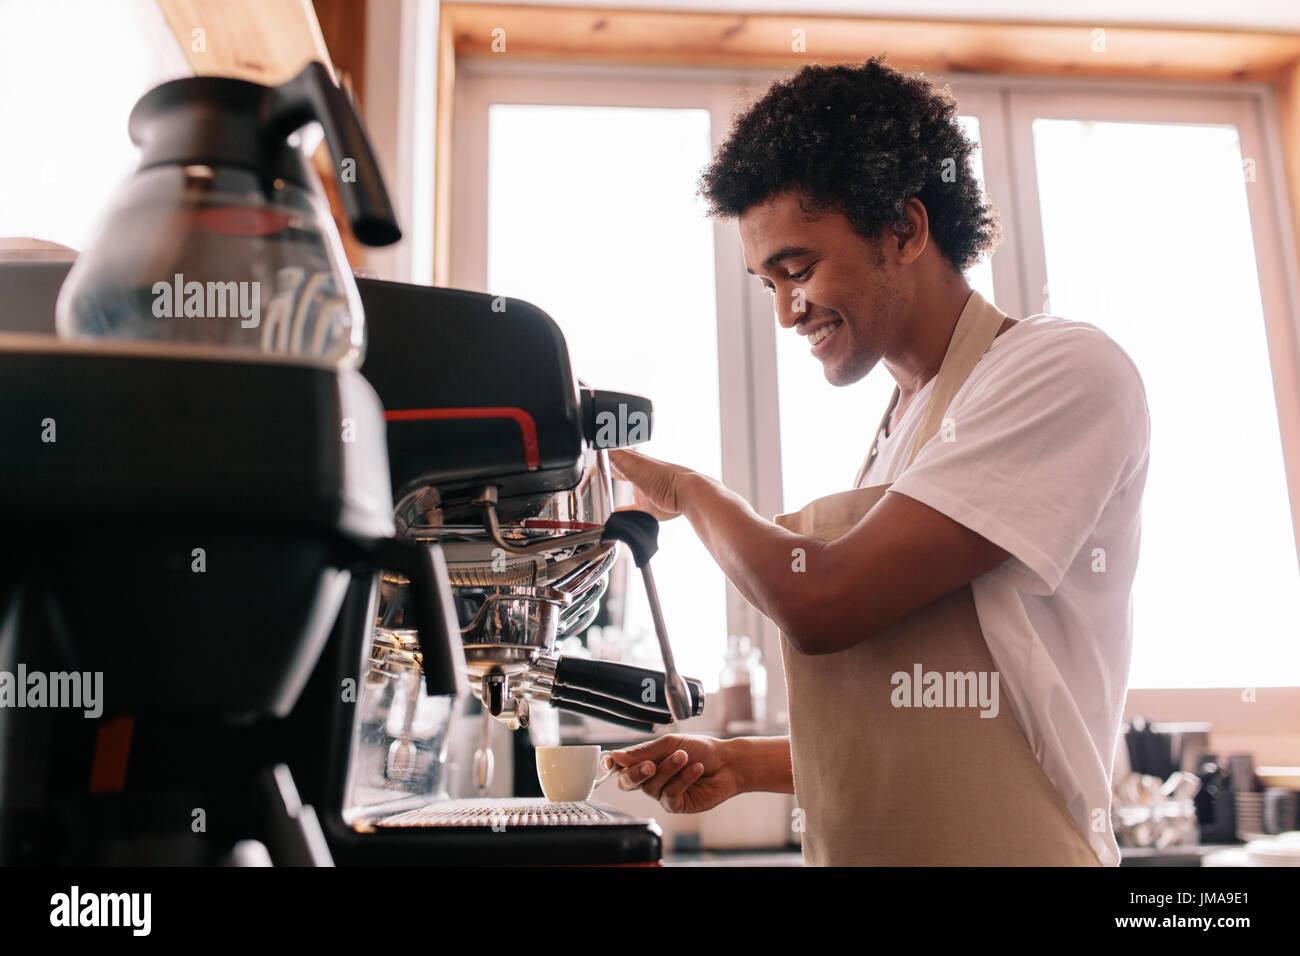 Professional barista holding cup on the coffee machine. Young man making coffee with an espresso coffee machine at cafe. Stock Photo